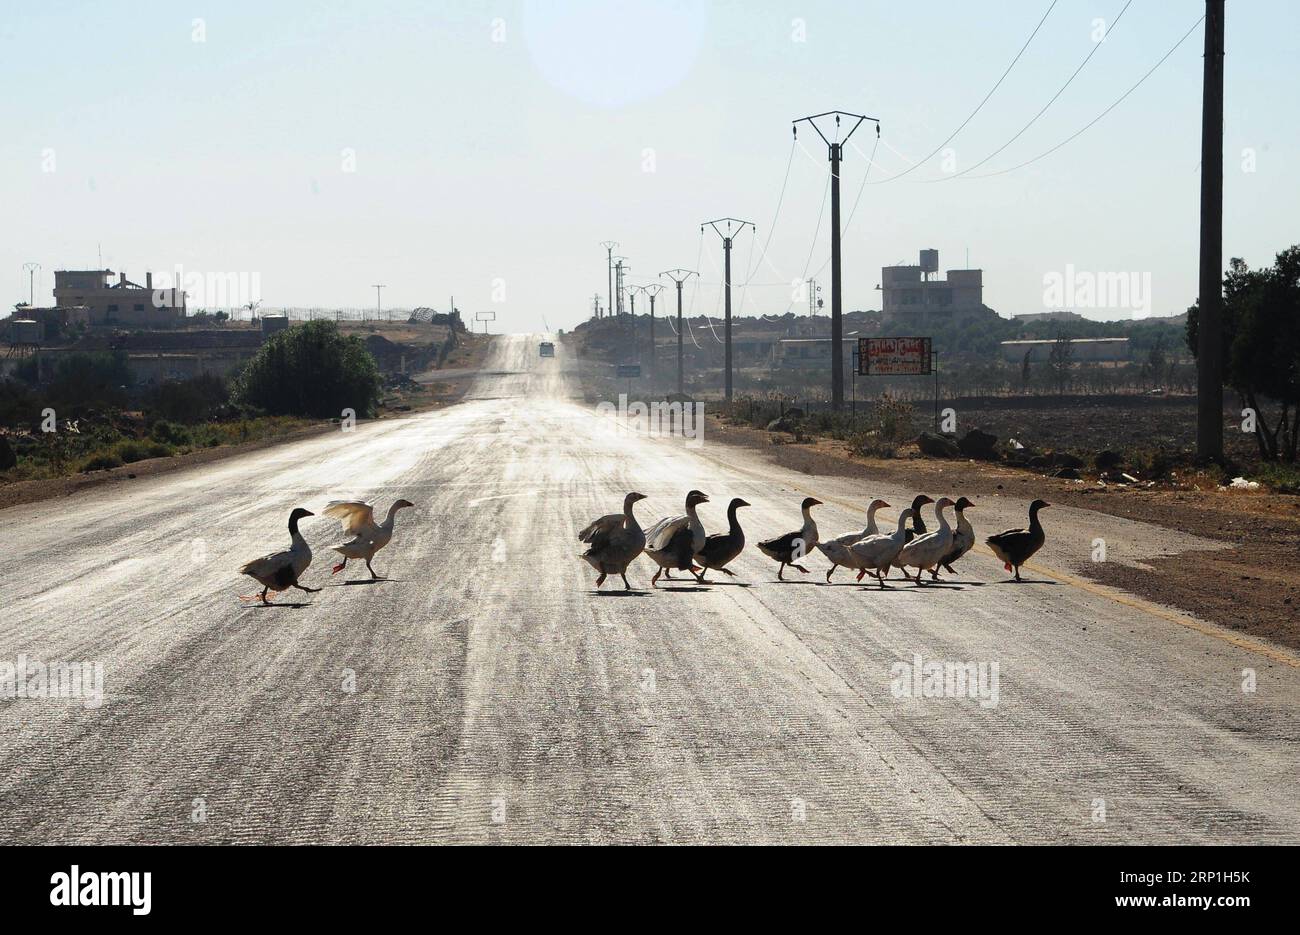 (180706) -- DARAA (SYRIA), July 6, 2018 -- Ducks cross a street in the town of Nuaimeh, near the Nasib border crossing, in the southeastern countryside of Daraa, Syria, on July 6, 2018. The Syrian army on Friday captured the Nasib border crossing, the only operative border crossing with Jordan, following a two-week long battle in the southern province of Daraa, according to the state TV. ) SYRIA-DARAA-NASIB BORDER CROSSING-JORDAN-CAPTURE AmmarxSafarjalani PUBLICATIONxNOTxINxCHN Stock Photo